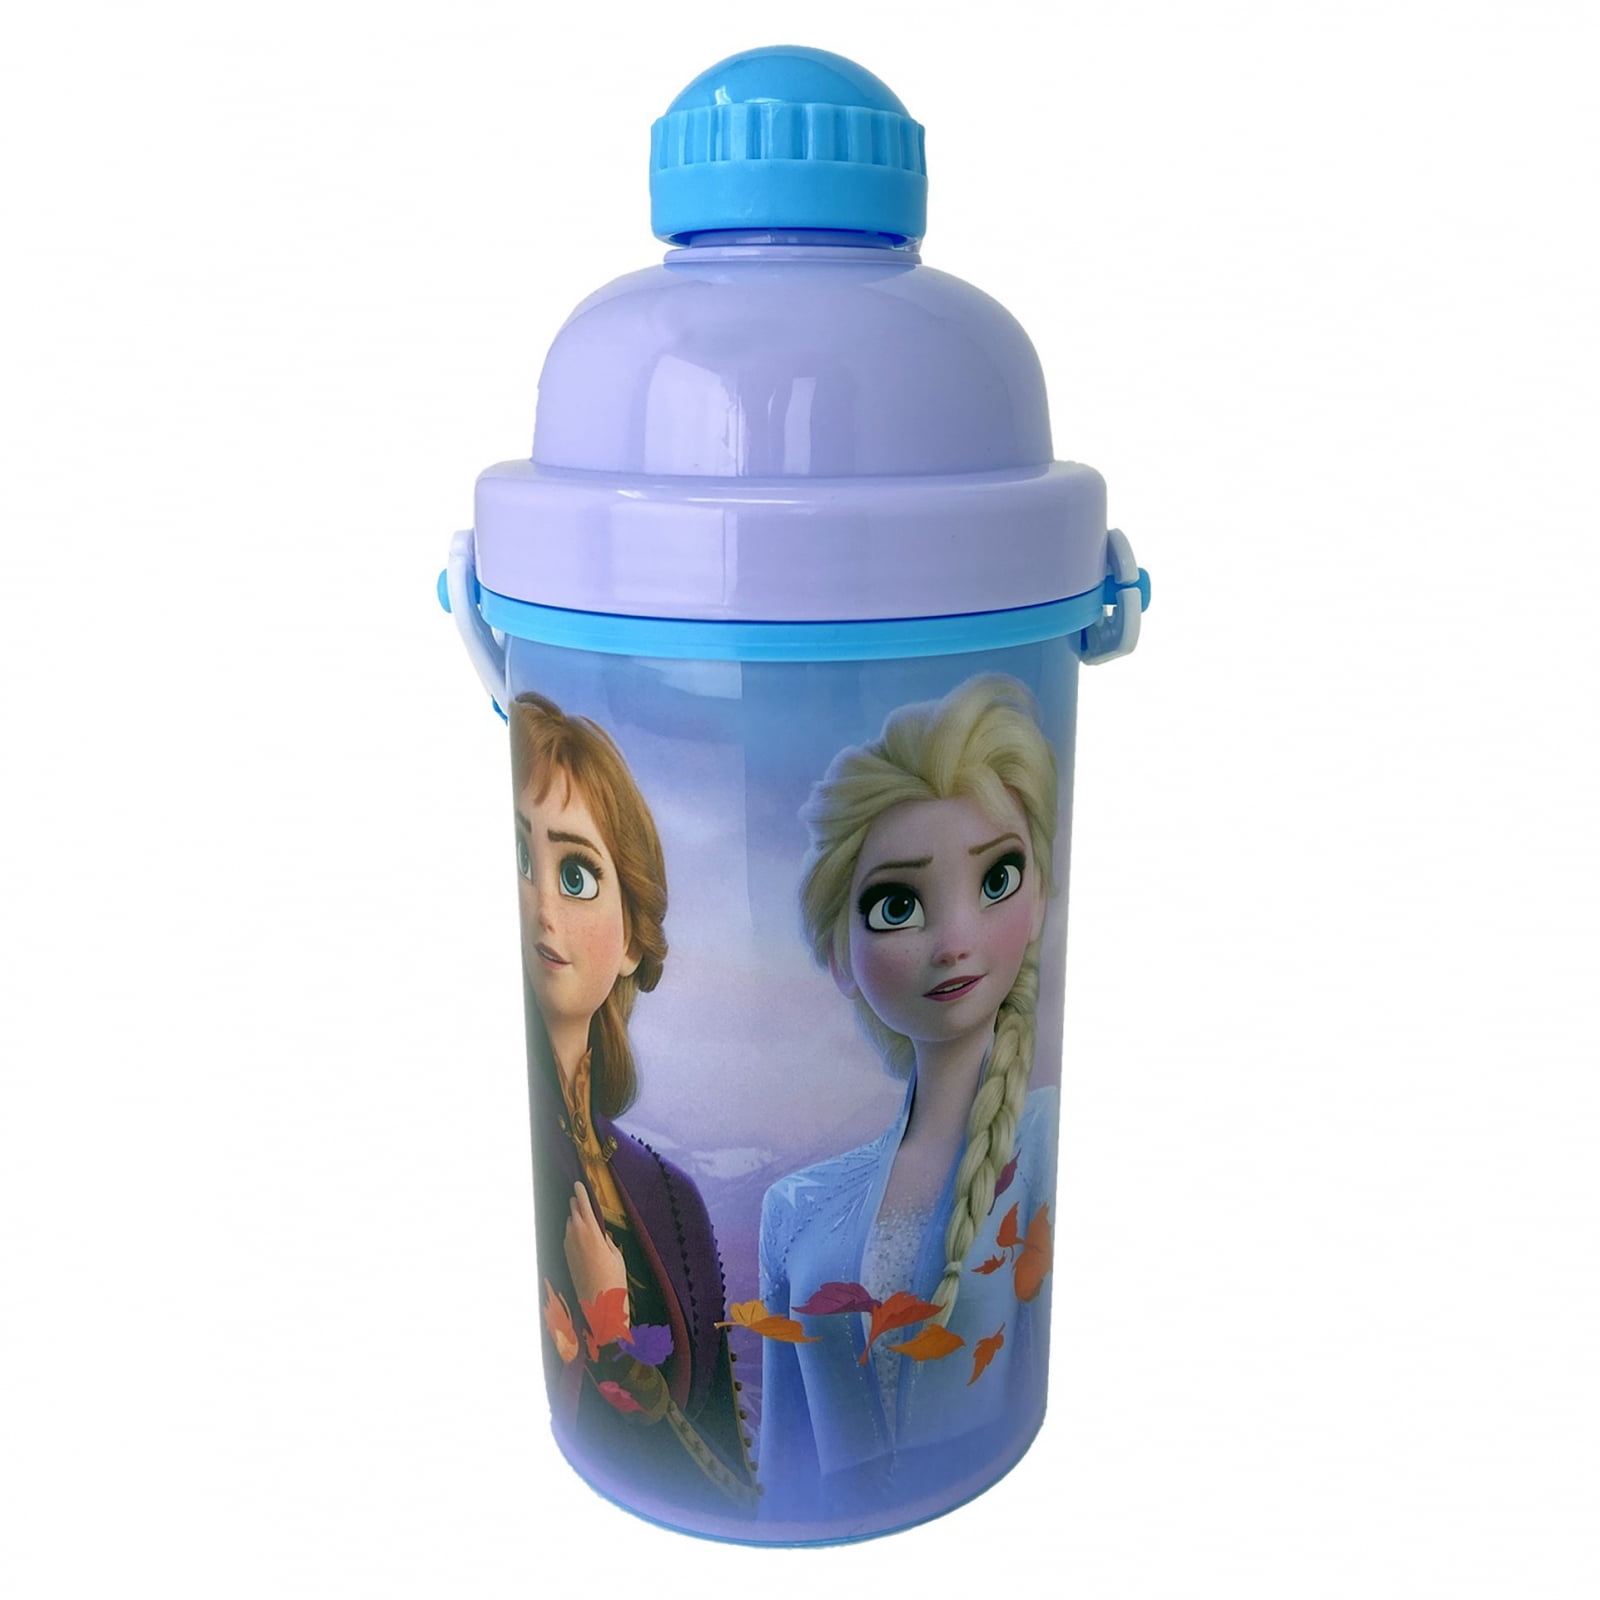 Girls (black and white) Water Bottle by Ana Linea